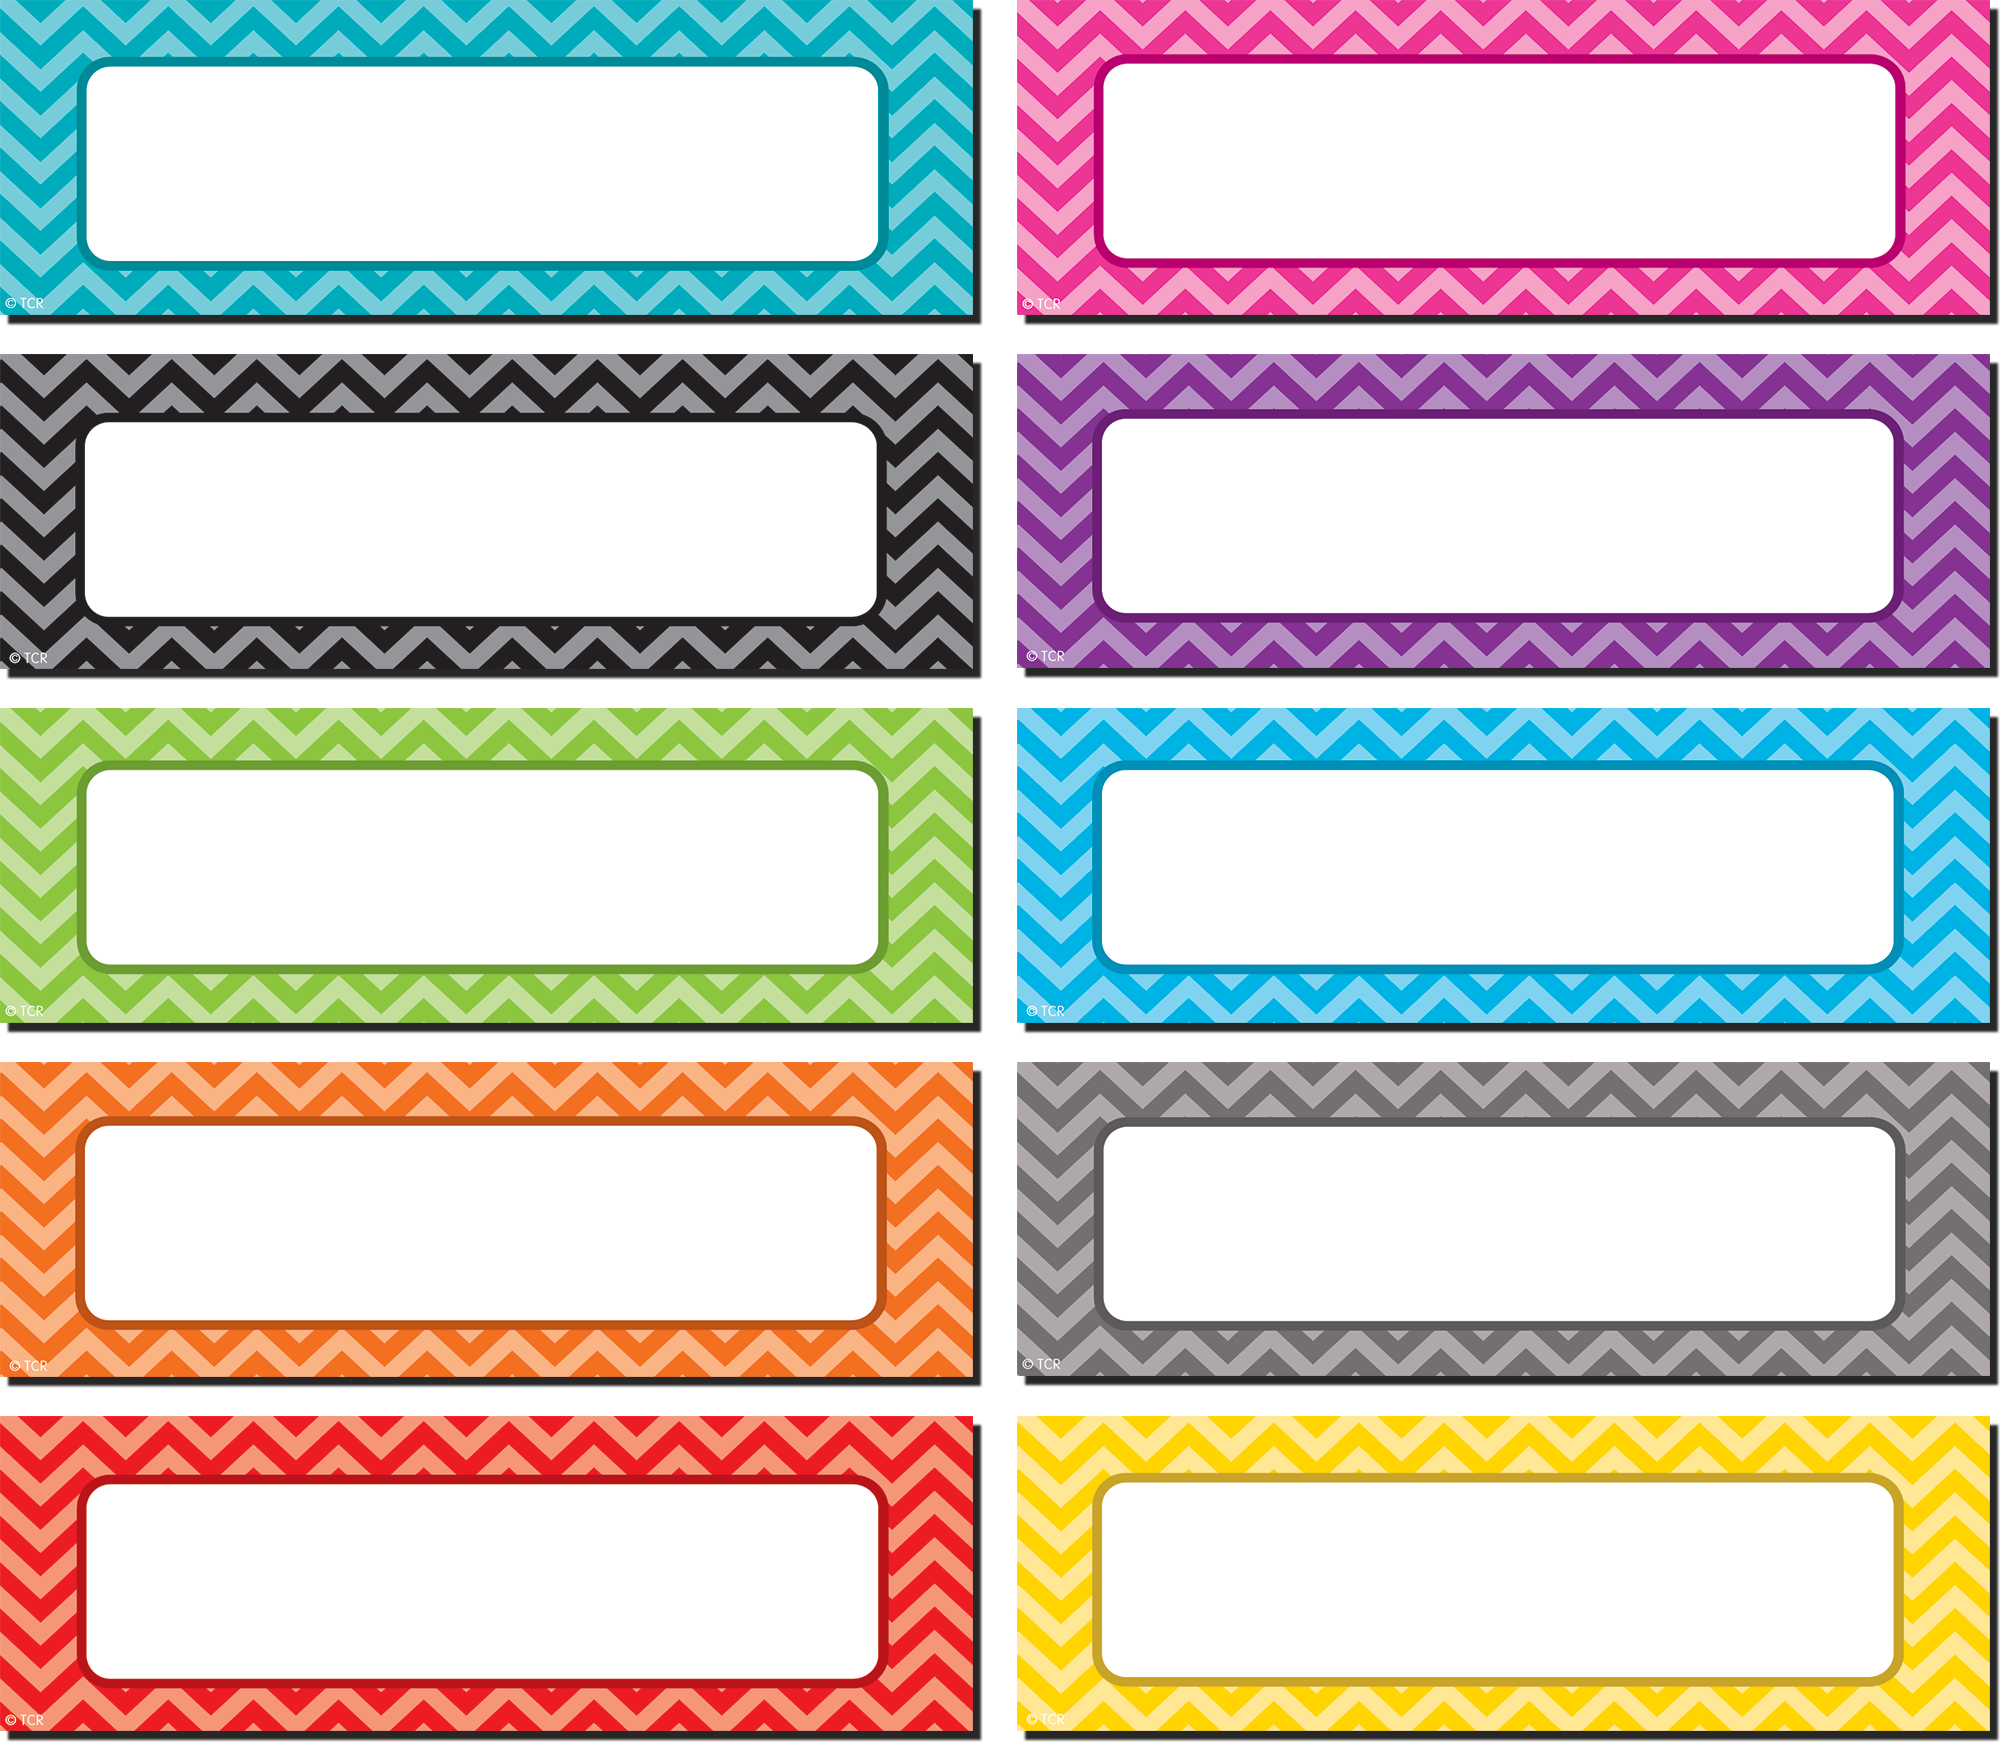 Teacher Created Resources 5548 Black and White Chevron and Dots Name Tags 